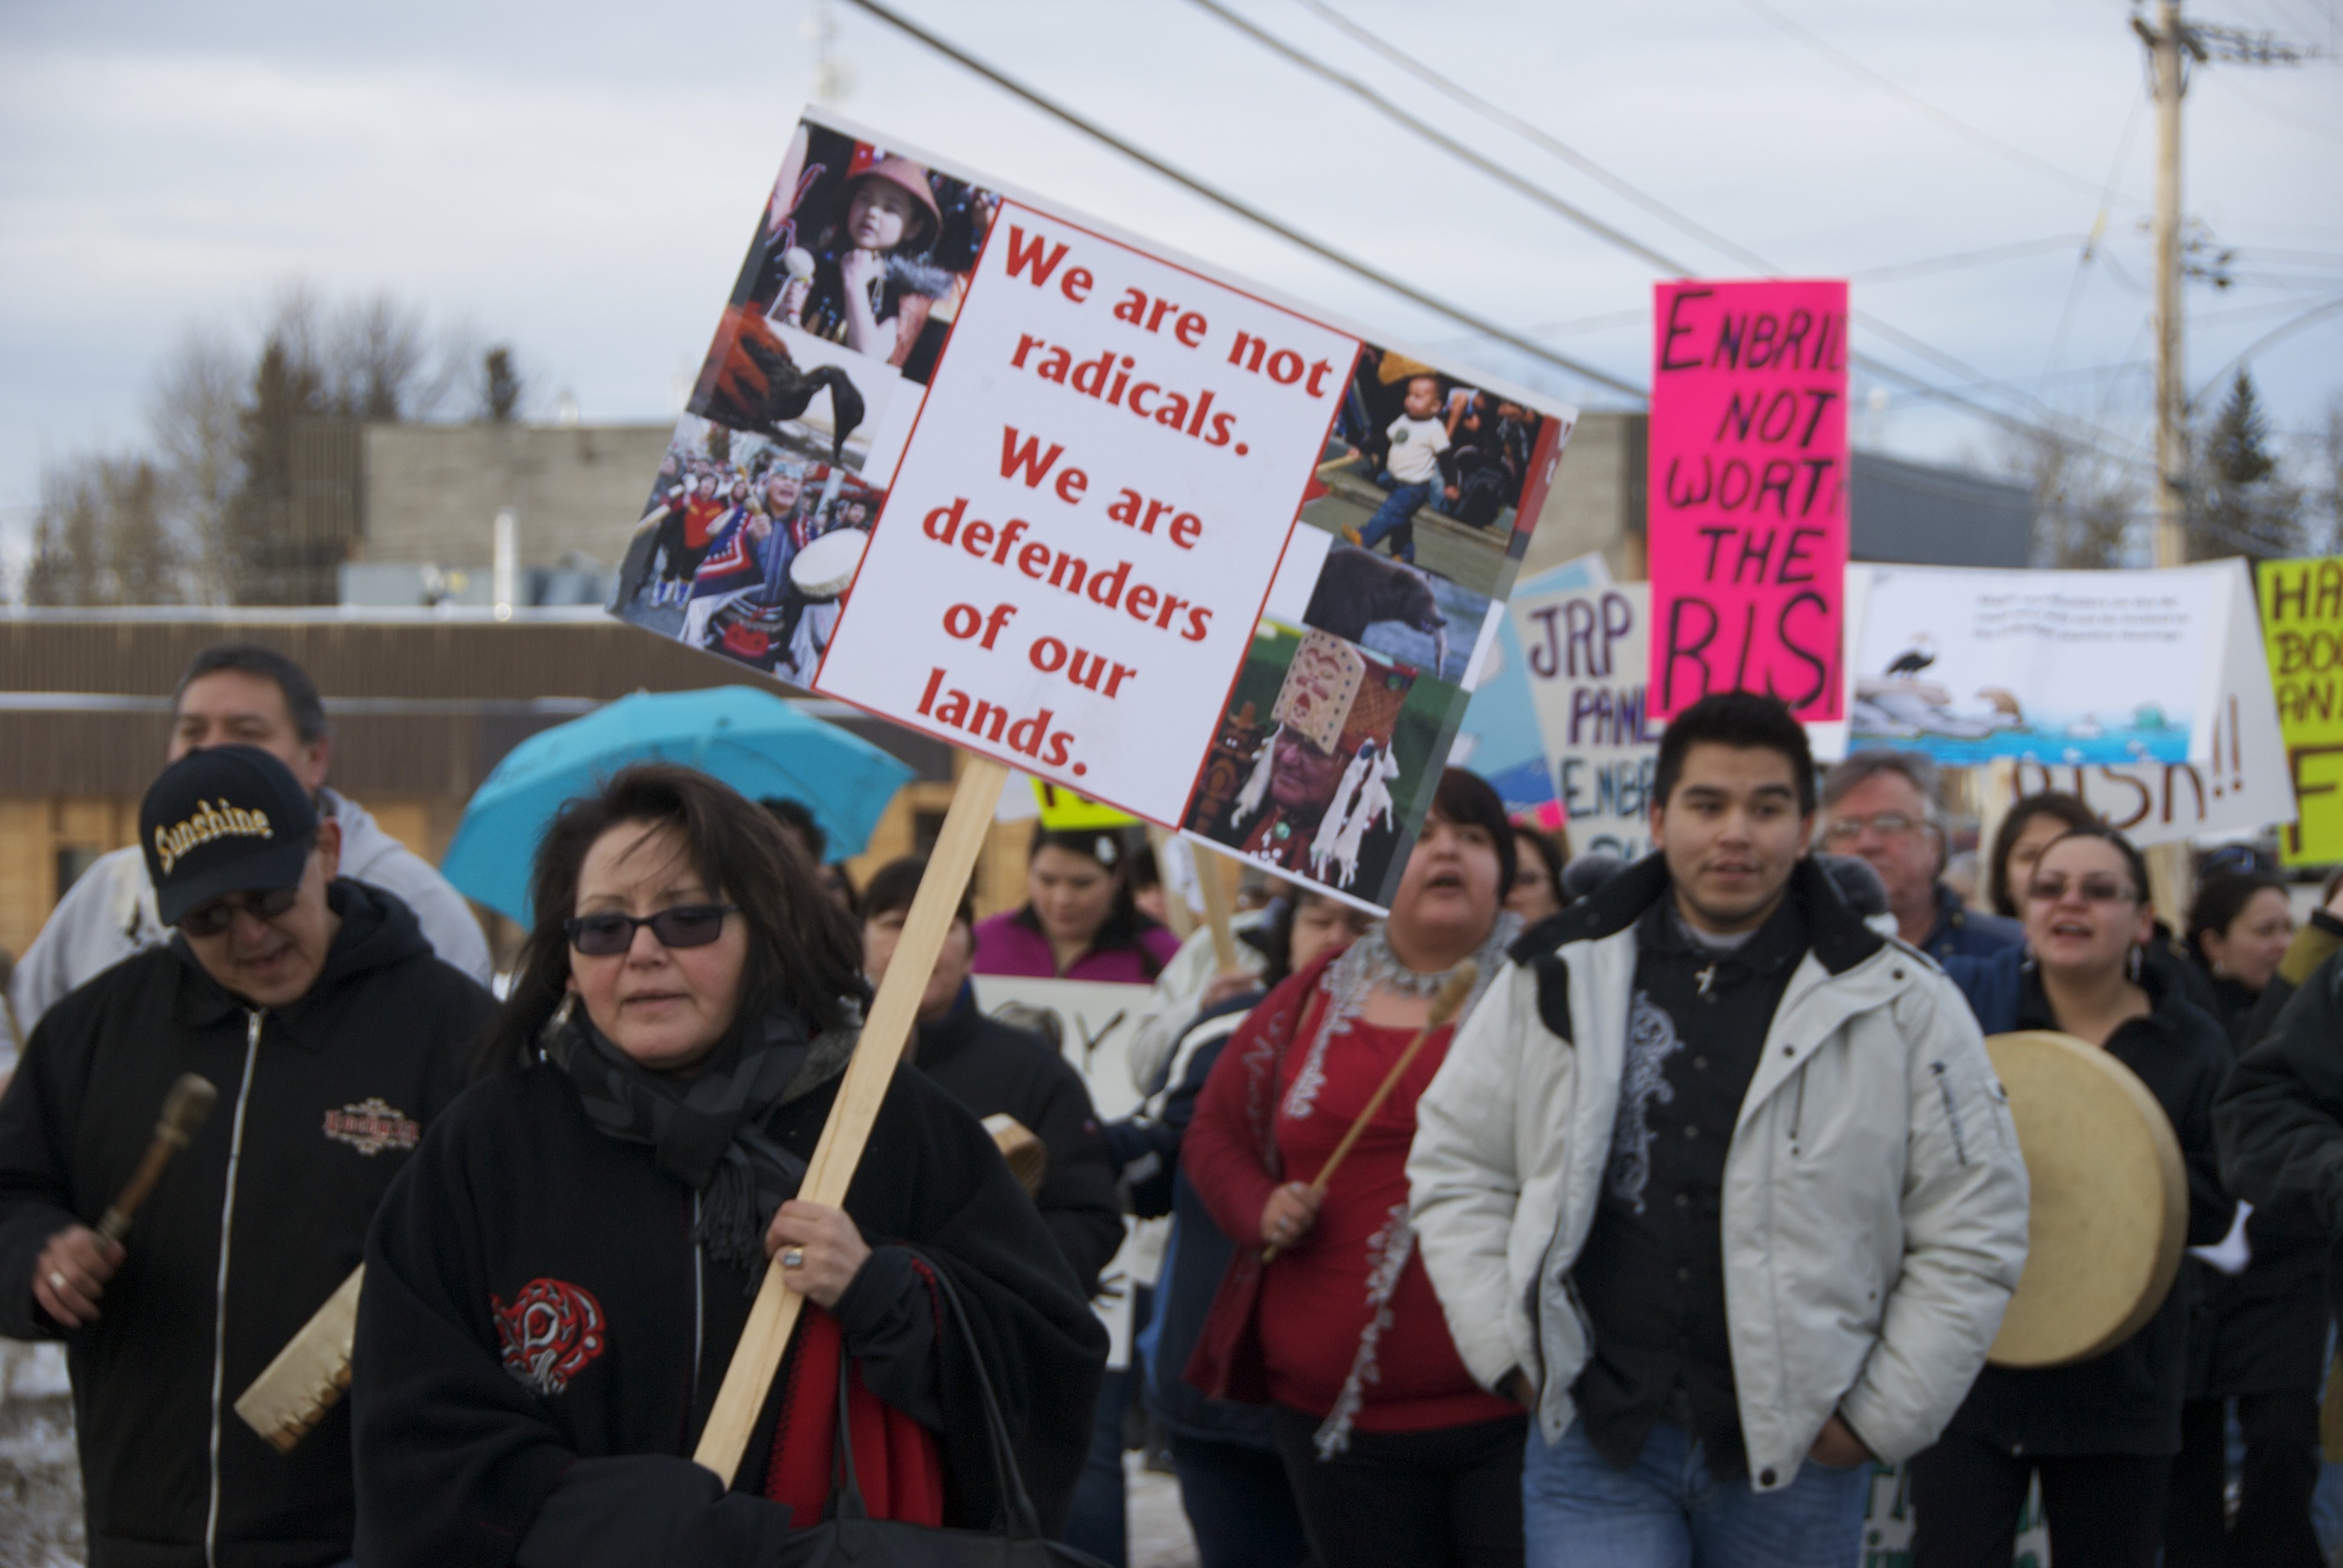 Protest Against Enbridge's proposed Northern Gateway pipeline in Fort St James